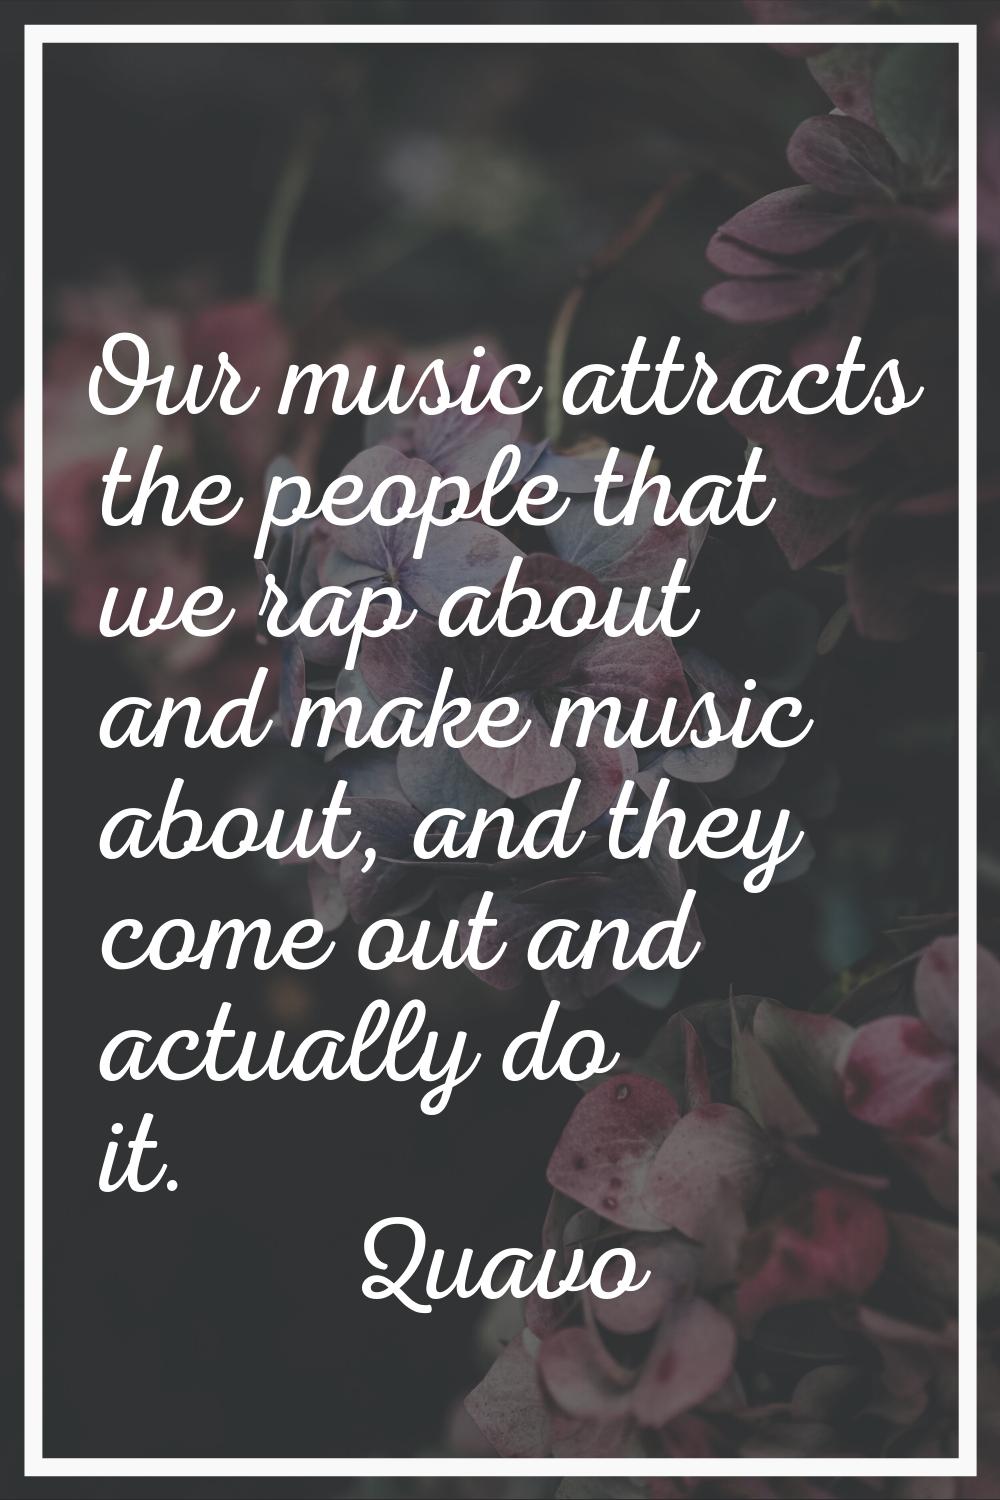 Our music attracts the people that we rap about and make music about, and they come out and actuall